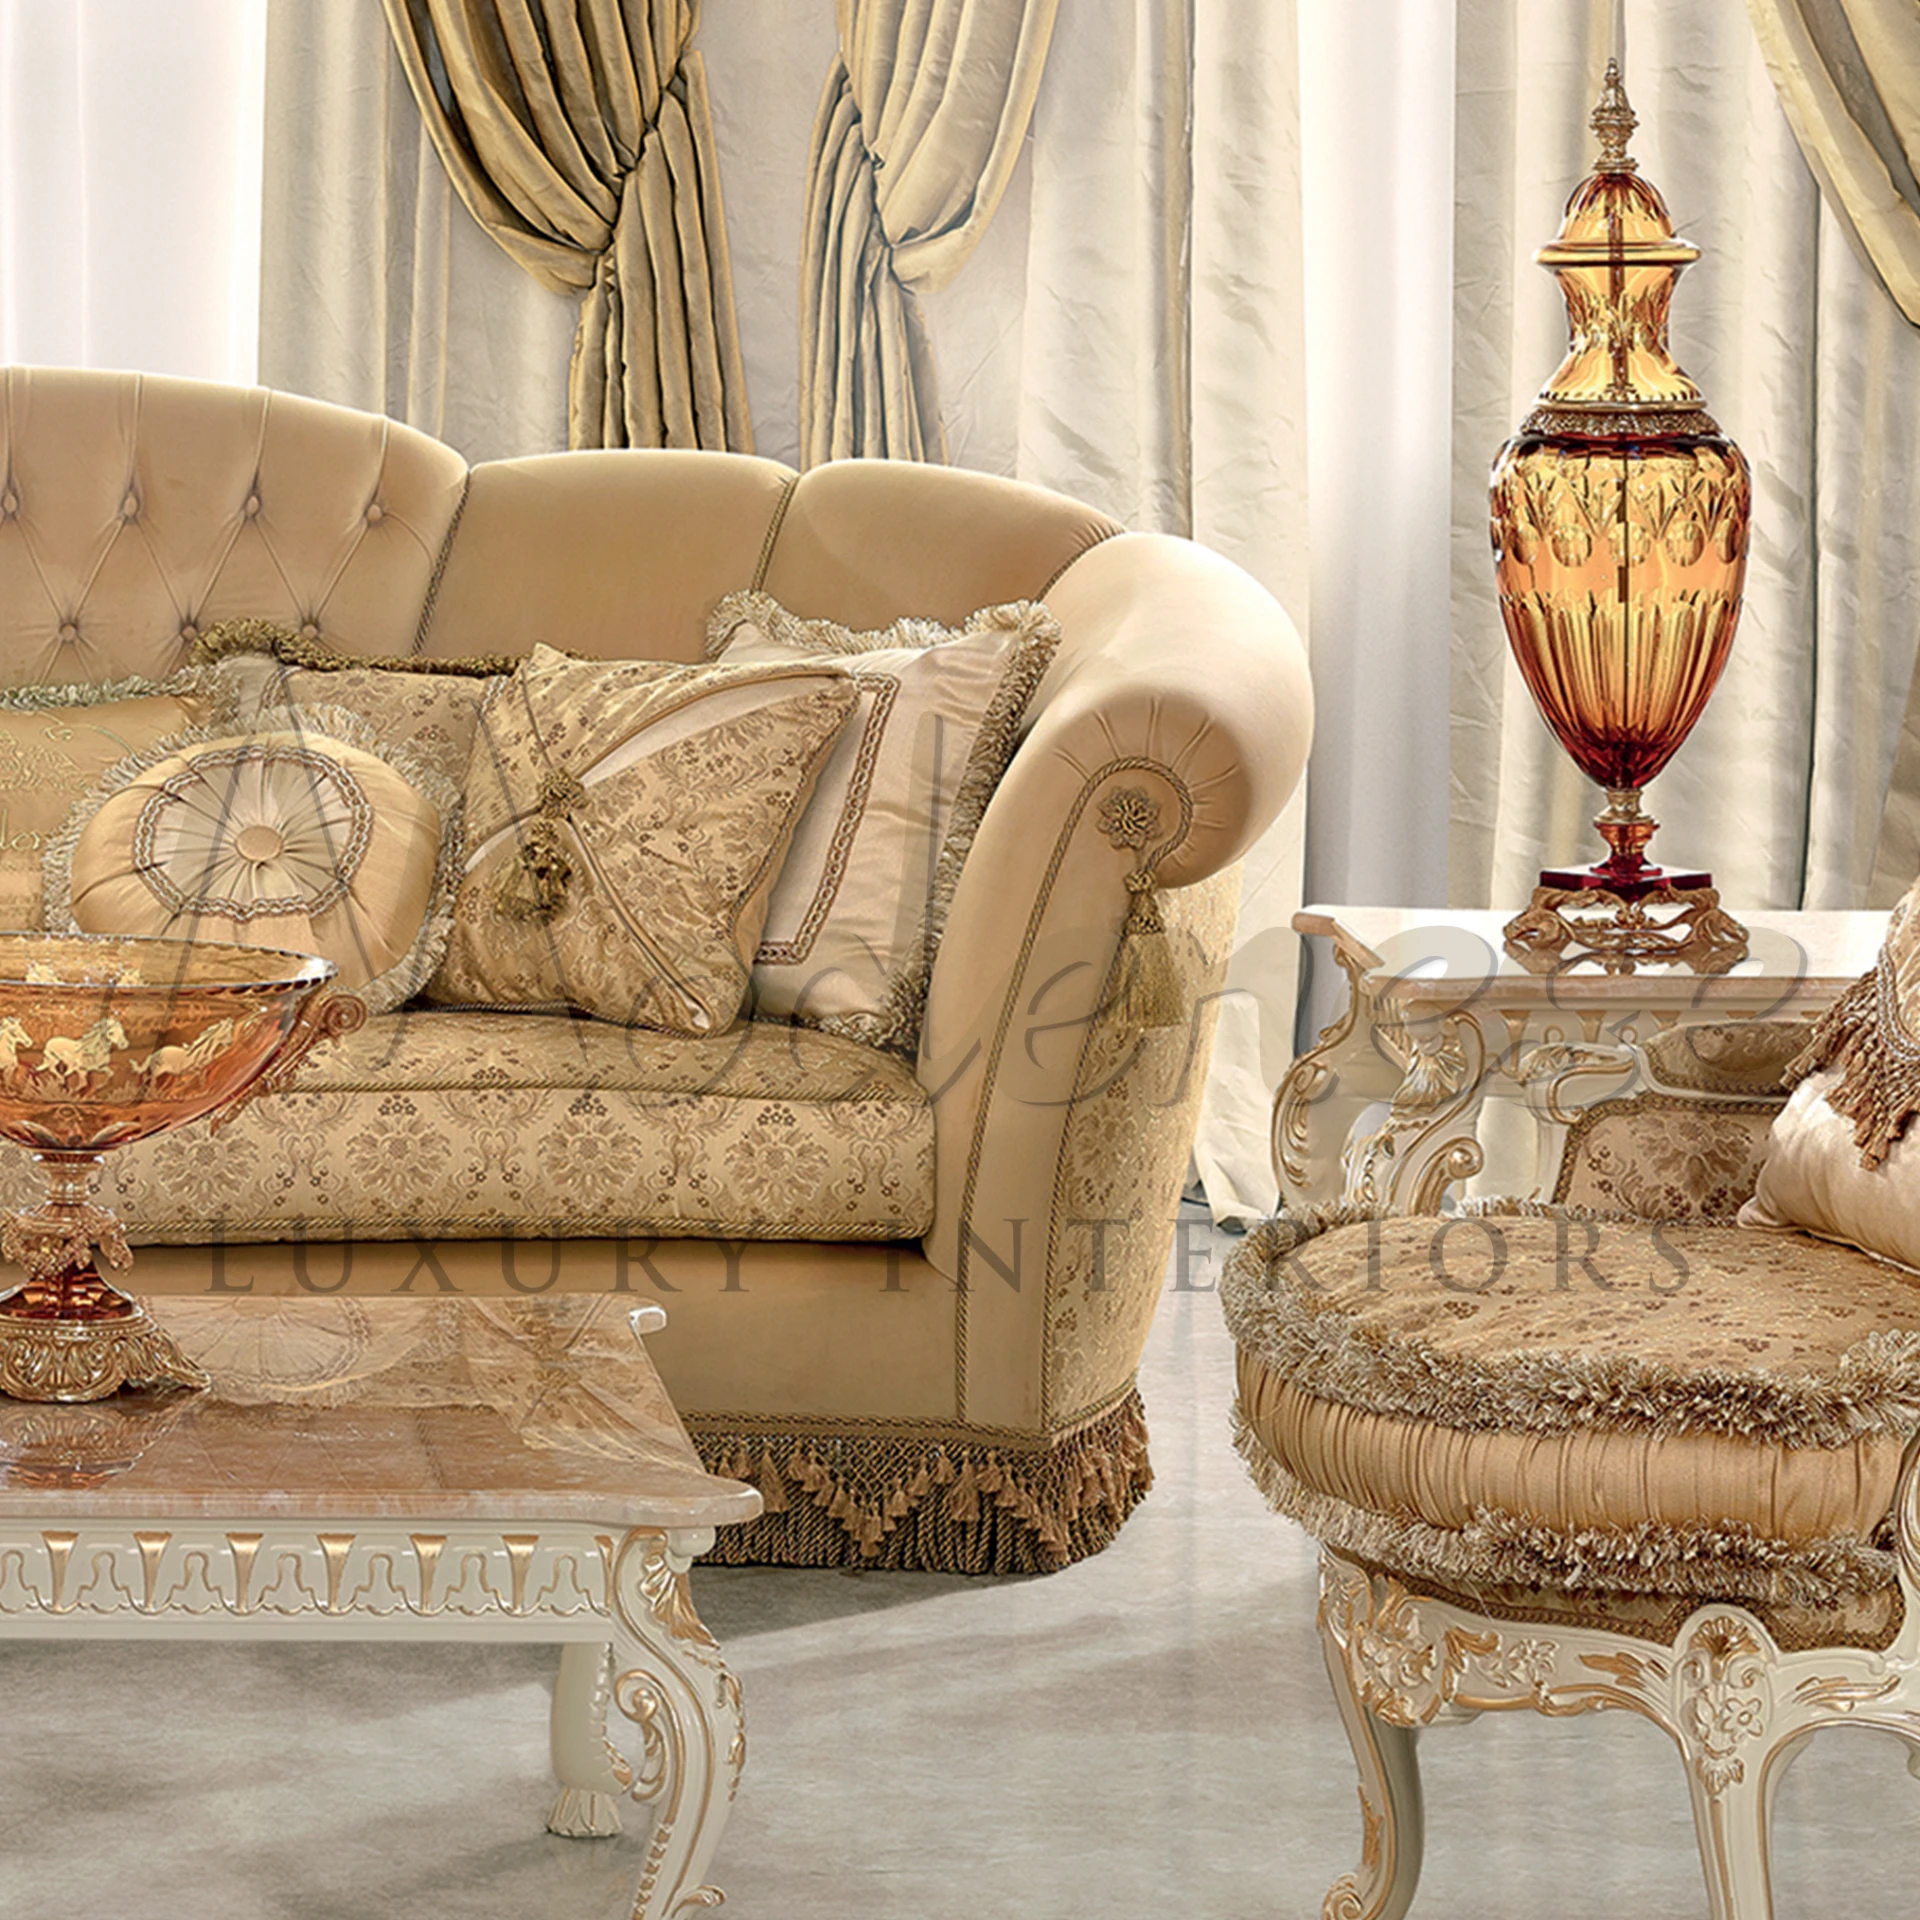 Refined furniture masterpiece: A solid wood framed Italian sofa with plush upholstery, melding luxury with classic design.